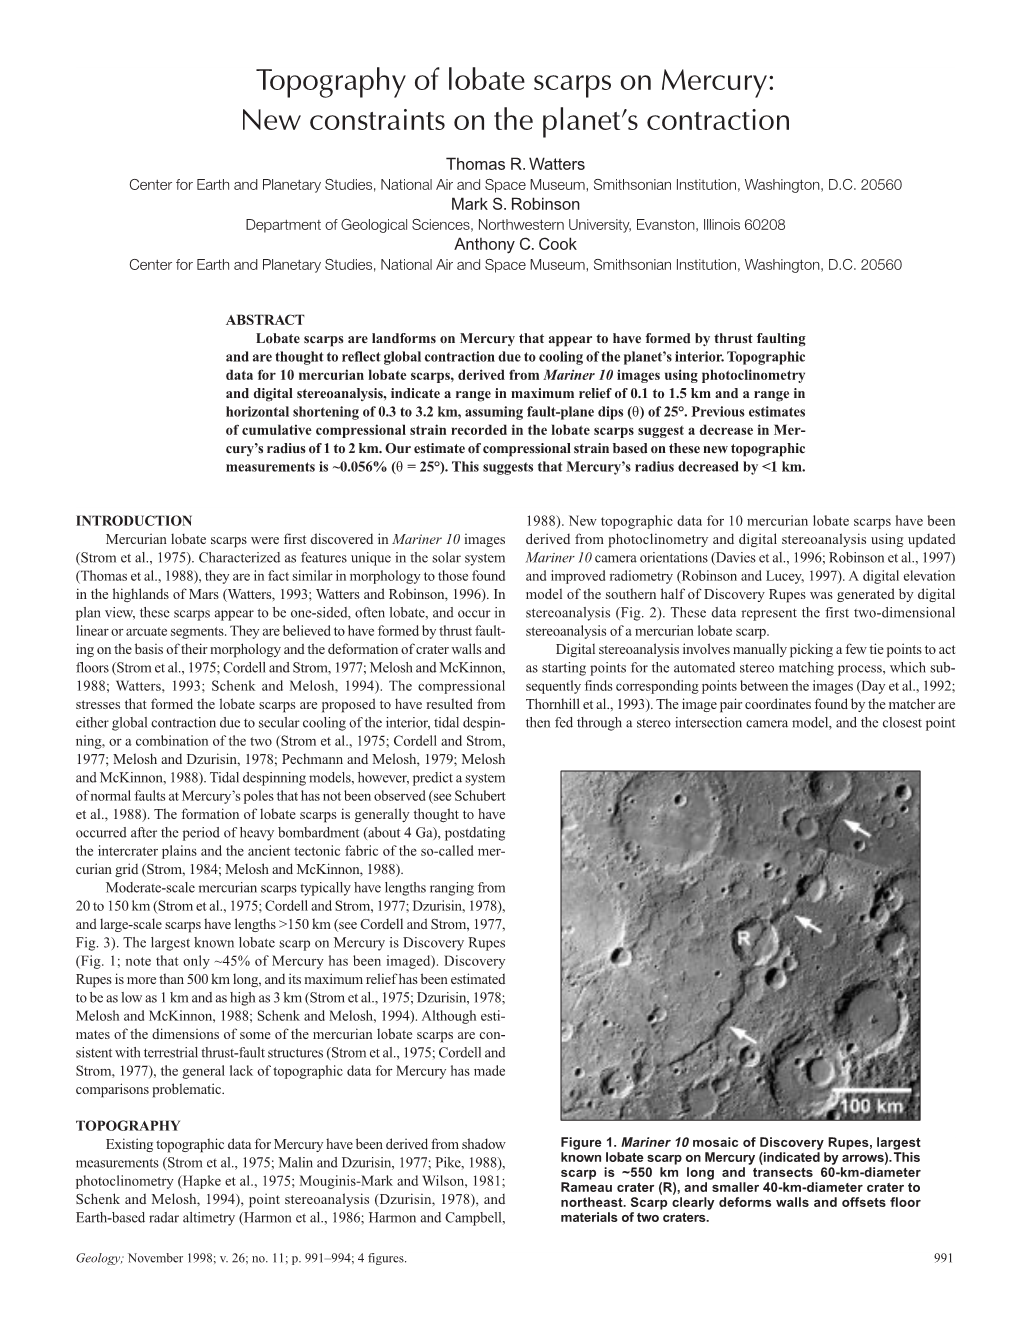 Topography of Lobate Scarps on Mercury: New Constraints on the Planet’S Contraction